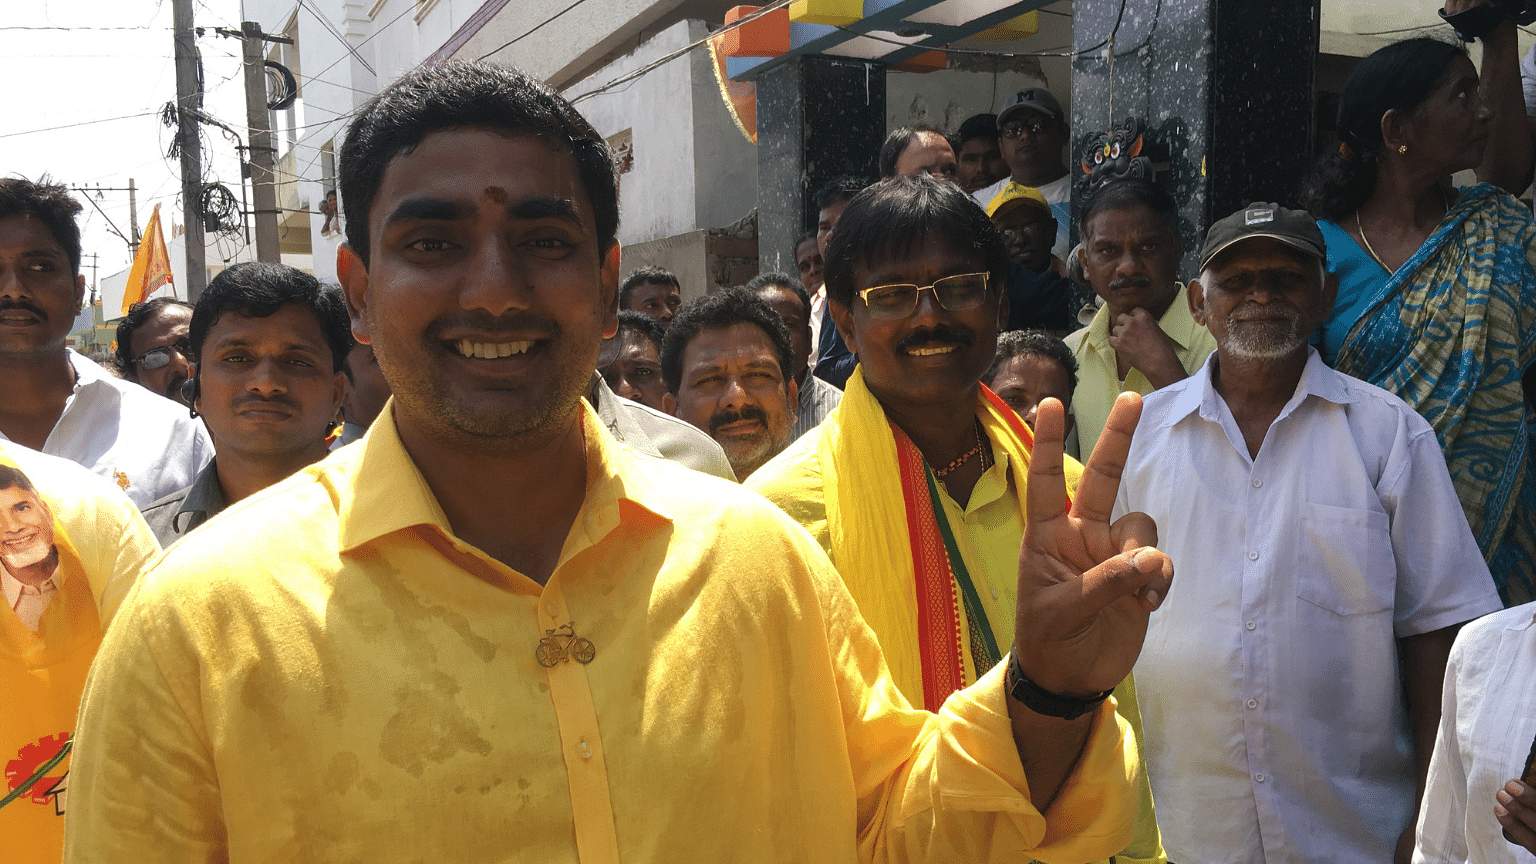 Nara Lokesh, IT Minister of Andhra Pradesh and son of Chandrababu Naidu, is contesting from an Assembly seat last won by TDP in 1985.